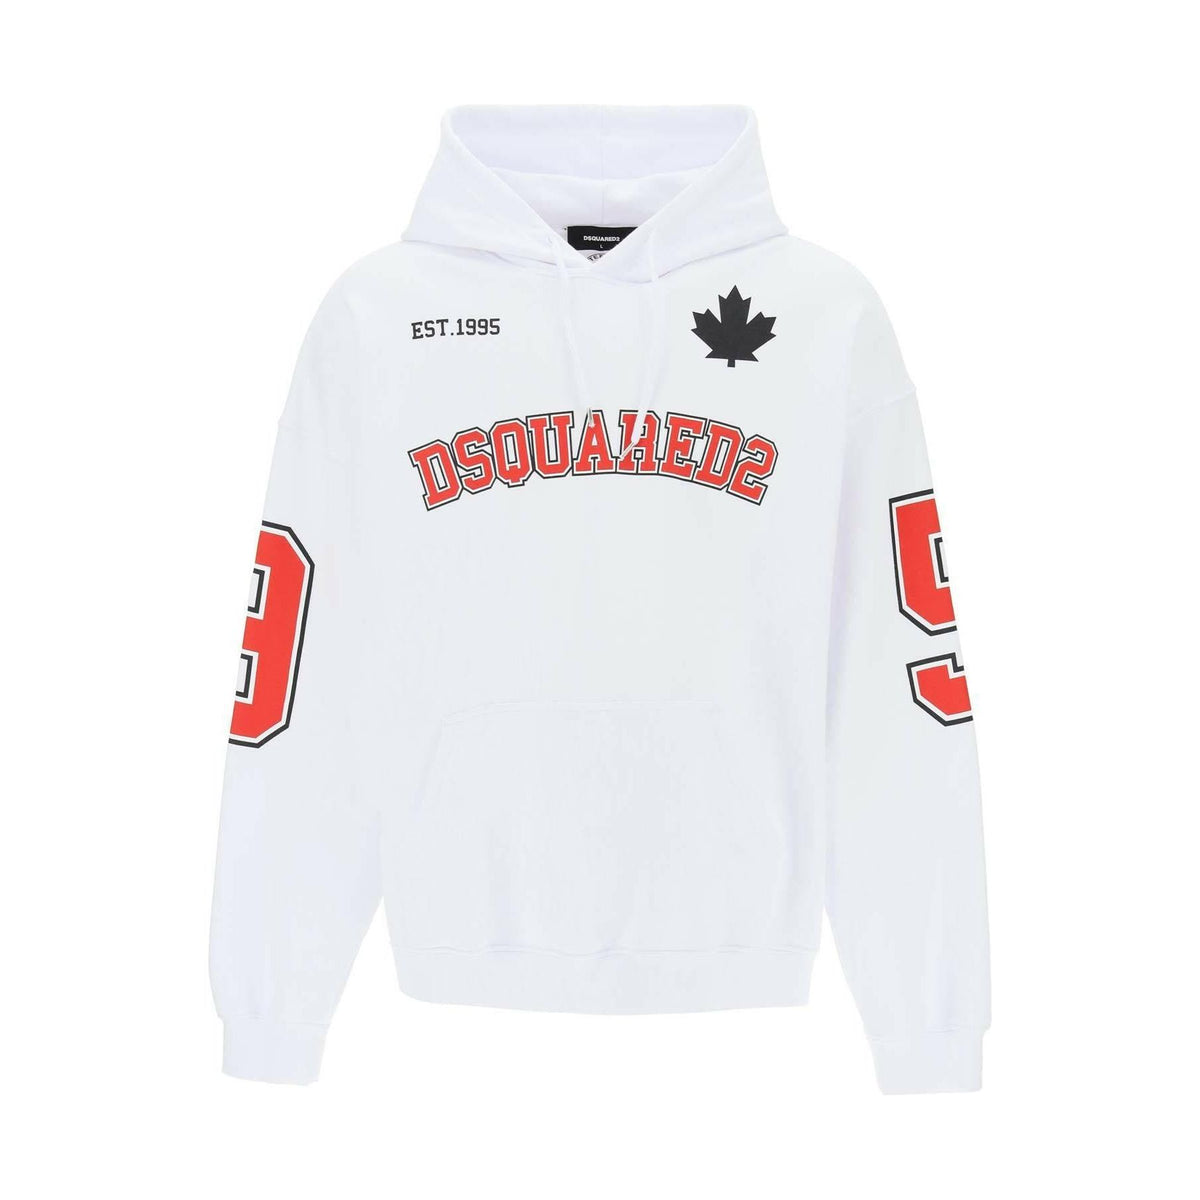 White Hooded Caten 64 Cotton Sweatshirt With Numerical Prints DSQUARED2 JOHN JULIA.